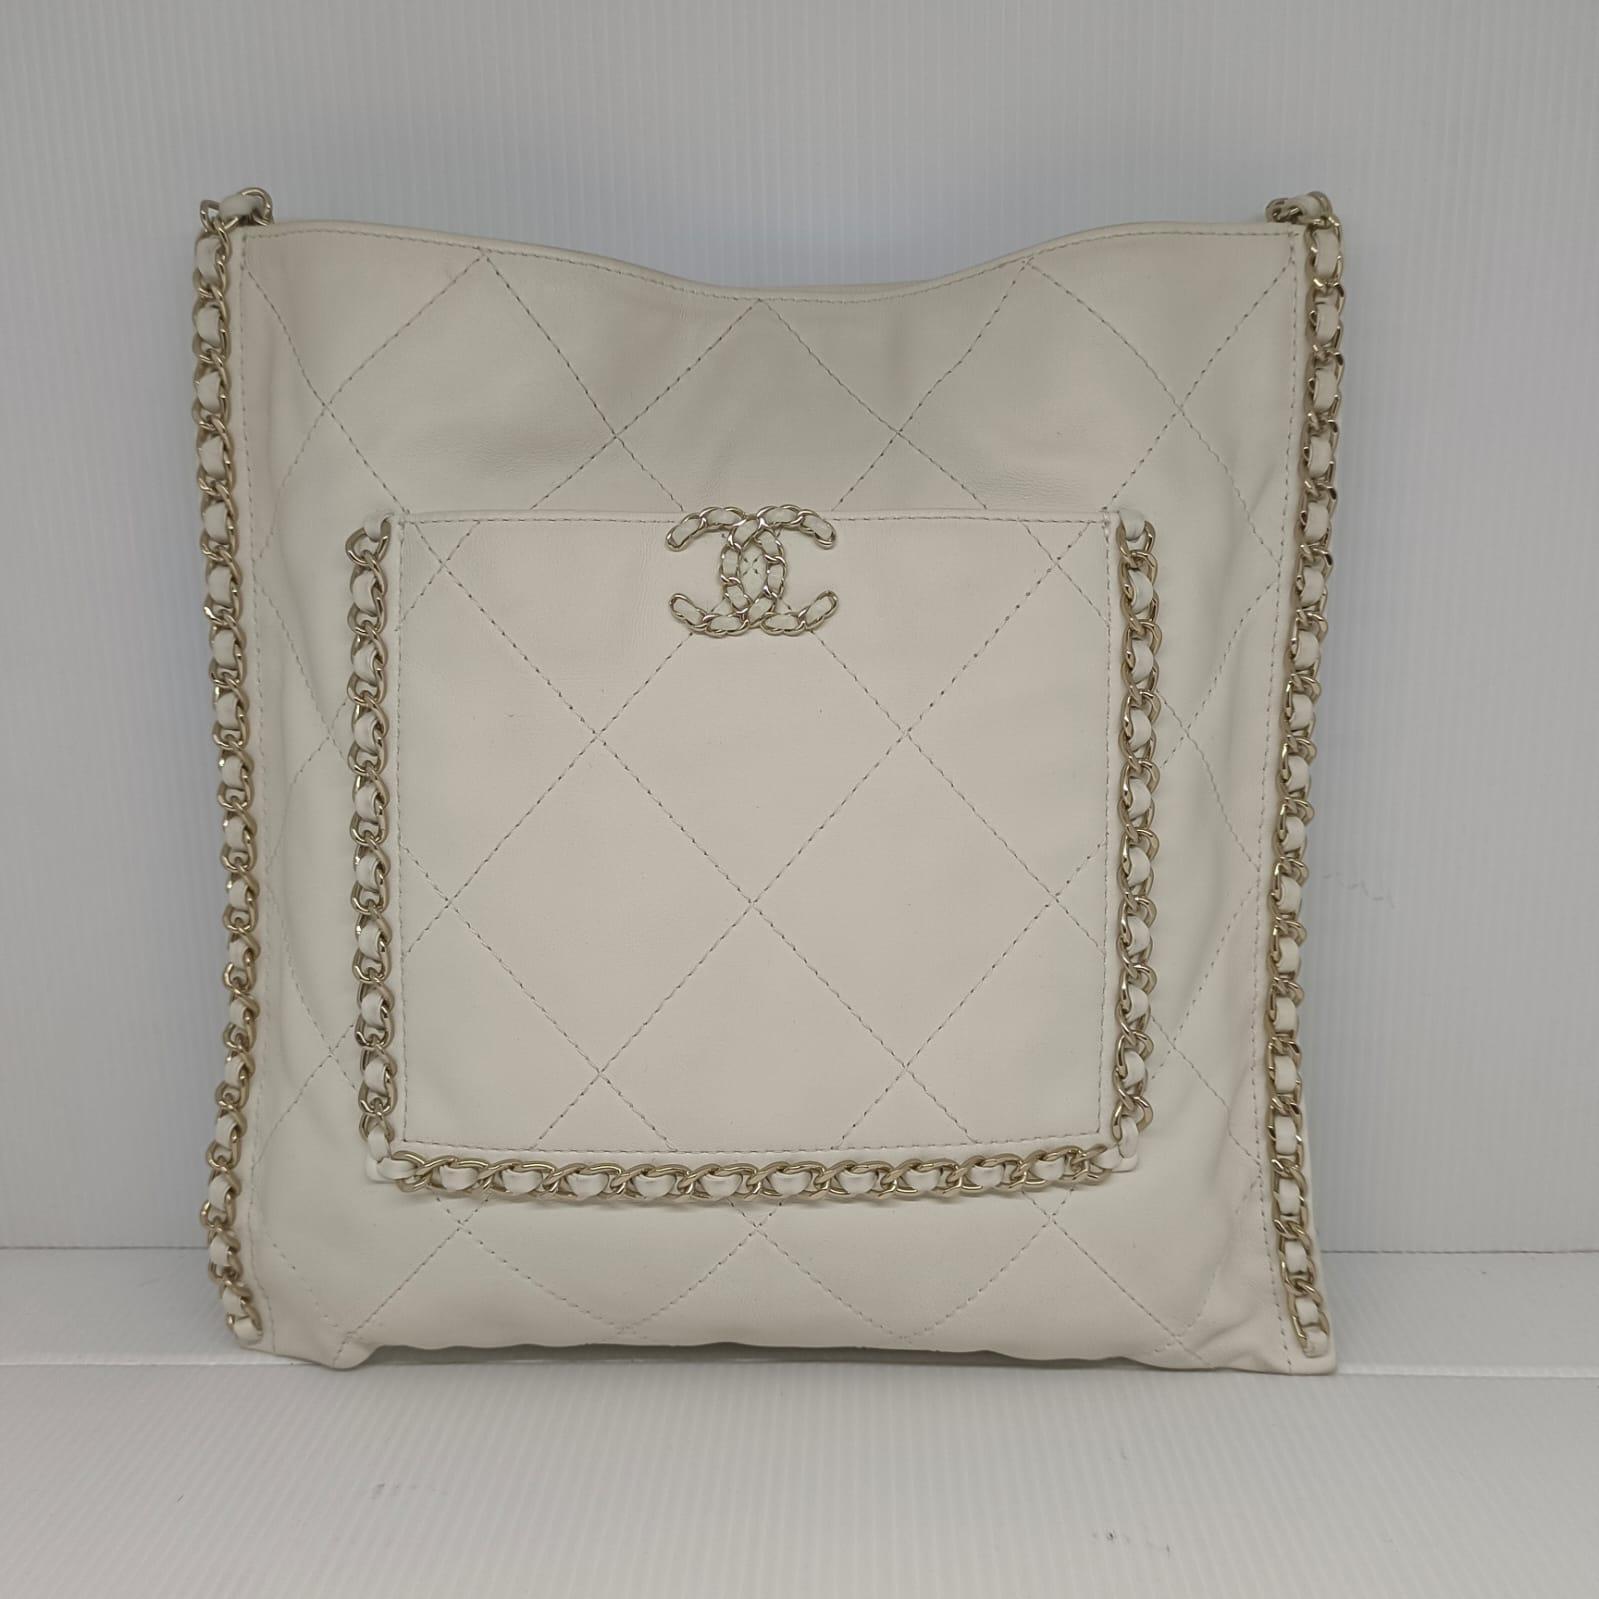 2022 Chanel White Calfskin Quilted Chain Trimmed Flat Tote Bag For Sale 6